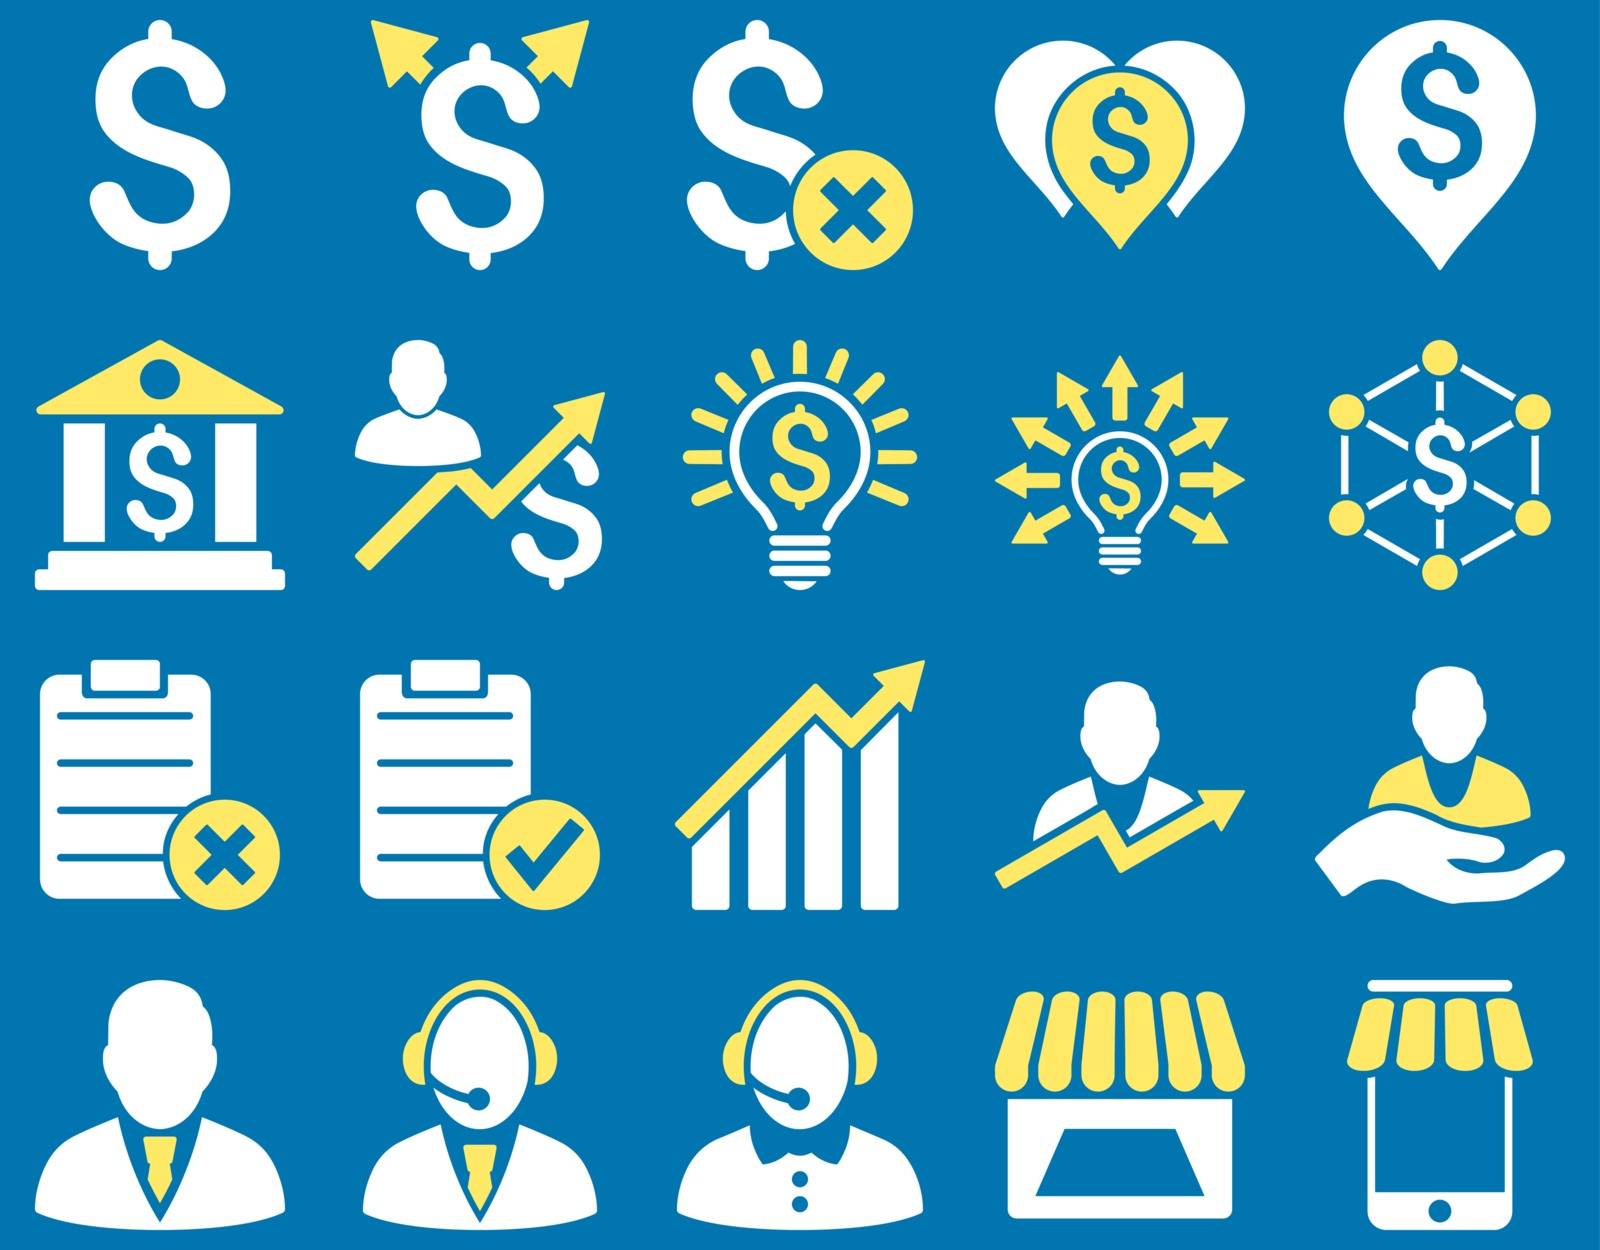 Trade business and bank service icon set. These flat bicolor icons use yellow and white colors. Images are isolated on a blue background. Angles are rounded.